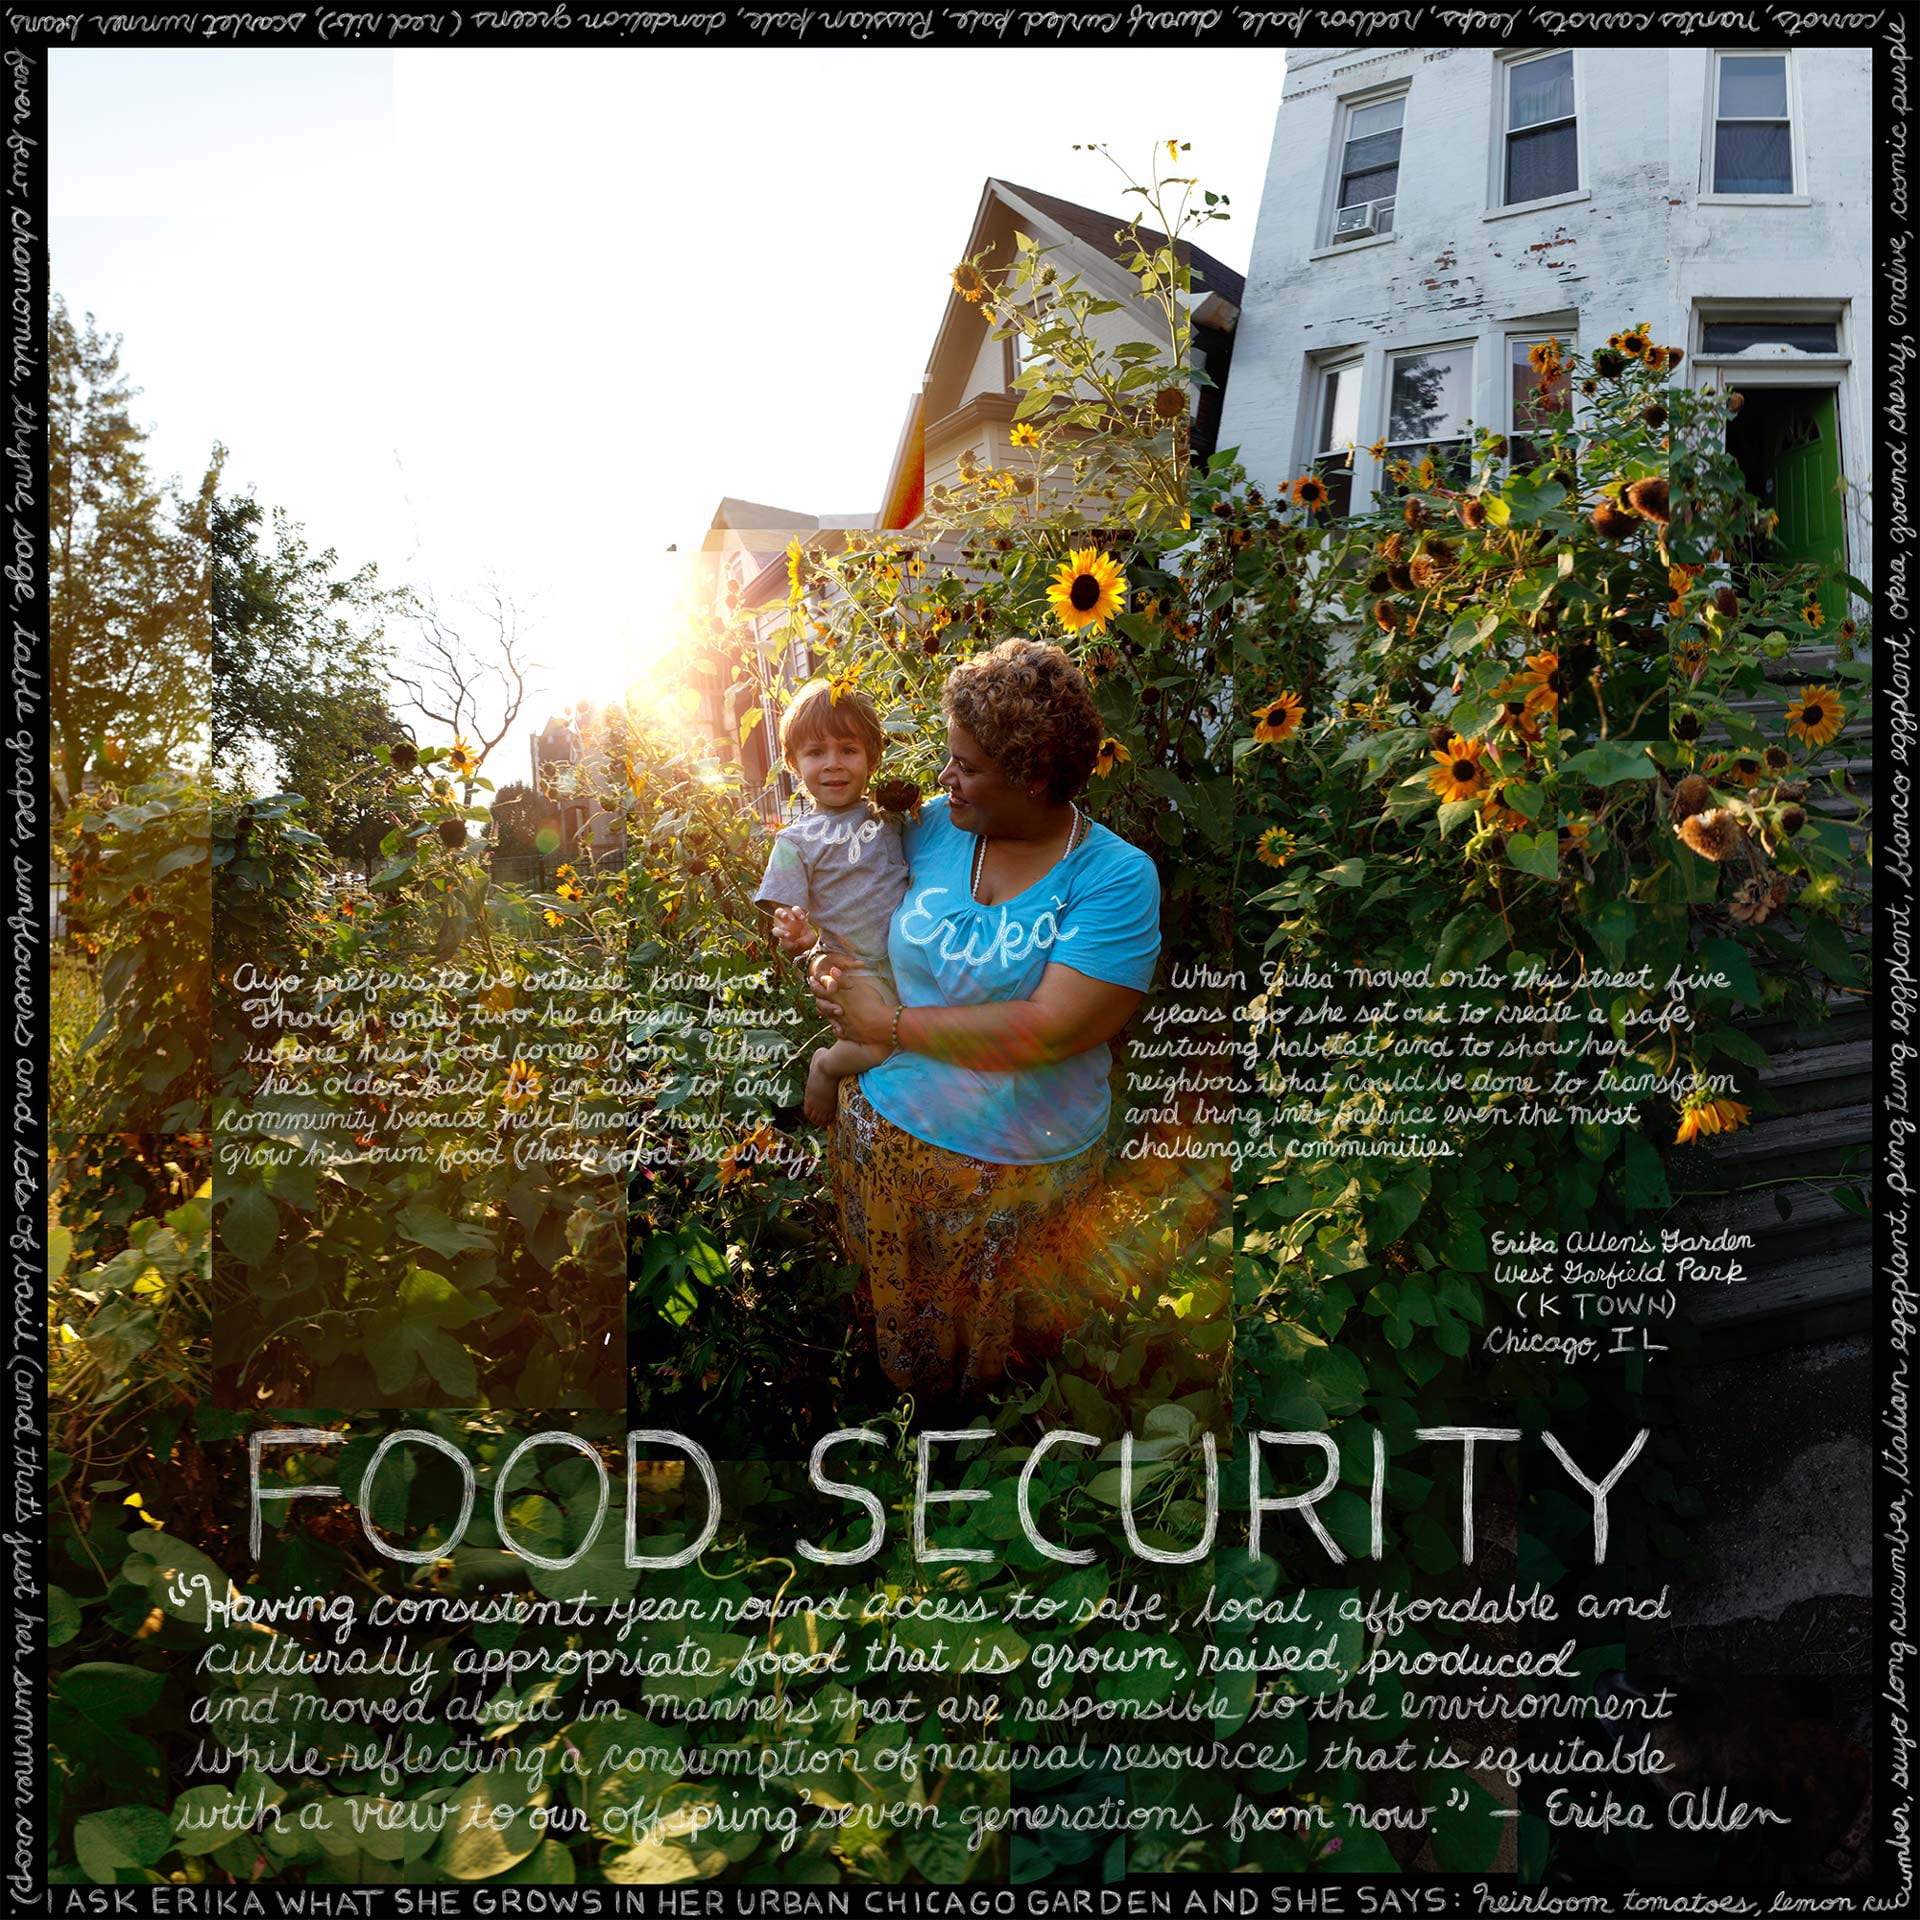 To portray what food security means to those experiencing food insecurity